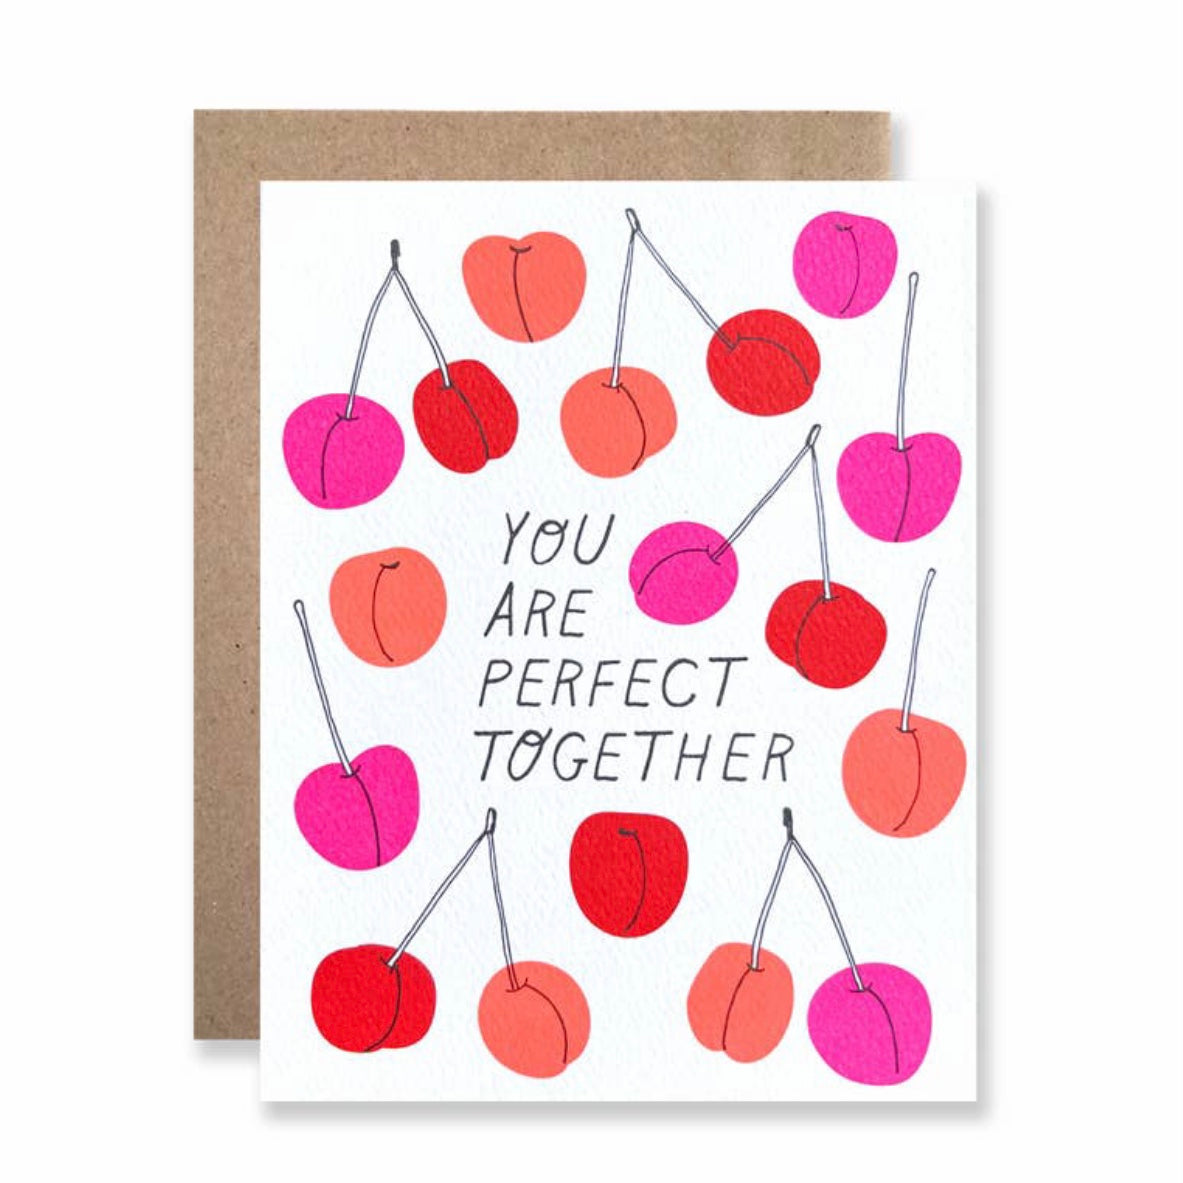 You are perfect together greeting card